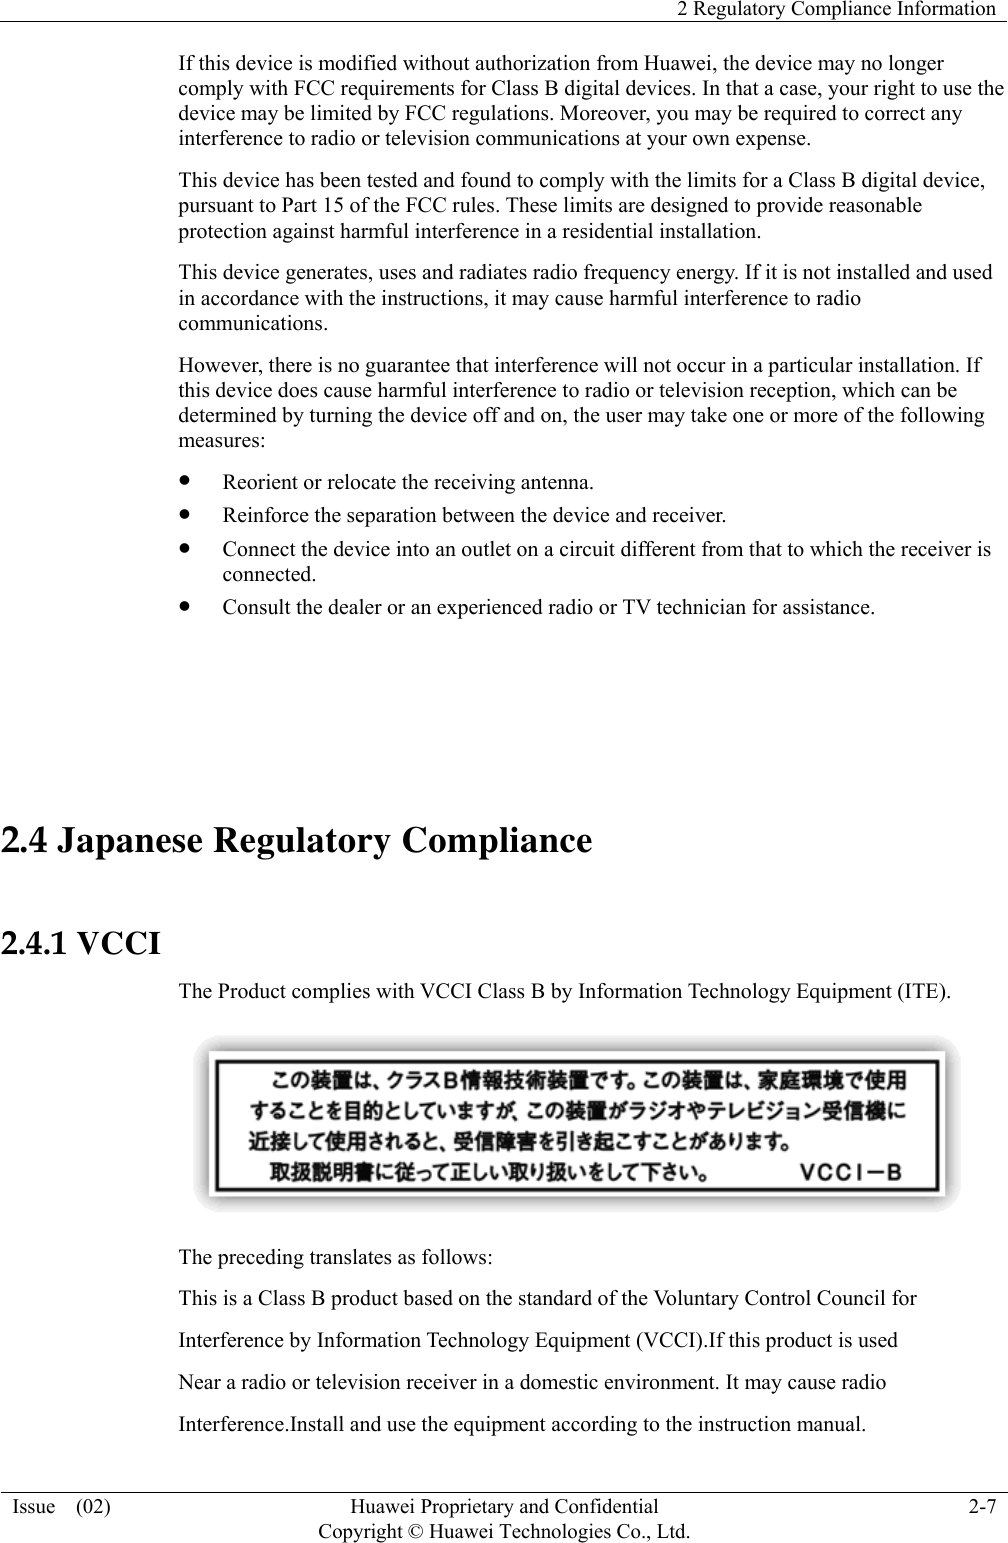   2 Regulatory Compliance Information Issue  (02)  Huawei Proprietary and Confidential     Copyright © Huawei Technologies Co., Ltd.2-7 If this device is modified without authorization from Huawei, the device may no longer comply with FCC requirements for Class B digital devices. In that a case, your right to use the device may be limited by FCC regulations. Moreover, you may be required to correct any interference to radio or television communications at your own expense. This device has been tested and found to comply with the limits for a Class B digital device, pursuant to Part 15 of the FCC rules. These limits are designed to provide reasonable protection against harmful interference in a residential installation. This device generates, uses and radiates radio frequency energy. If it is not installed and used in accordance with the instructions, it may cause harmful interference to radio communications. However, there is no guarantee that interference will not occur in a particular installation. If this device does cause harmful interference to radio or television reception, which can be determined by turning the device off and on, the user may take one or more of the following measures: z Reorient or relocate the receiving antenna. z Reinforce the separation between the device and receiver. z Connect the device into an outlet on a circuit different from that to which the receiver is connected. z Consult the dealer or an experienced radio or TV technician for assistance.  2.4 Japanese Regulatory Compliance  2.4.1 VCCI The Product complies with VCCI Class B by Information Technology Equipment (ITE).  The preceding translates as follows: This is a Class B product based on the standard of the Voluntary Control Council for Interference by Information Technology Equipment (VCCI).If this product is used Near a radio or television receiver in a domestic environment. It may cause radio Interference.Install and use the equipment according to the instruction manual.   